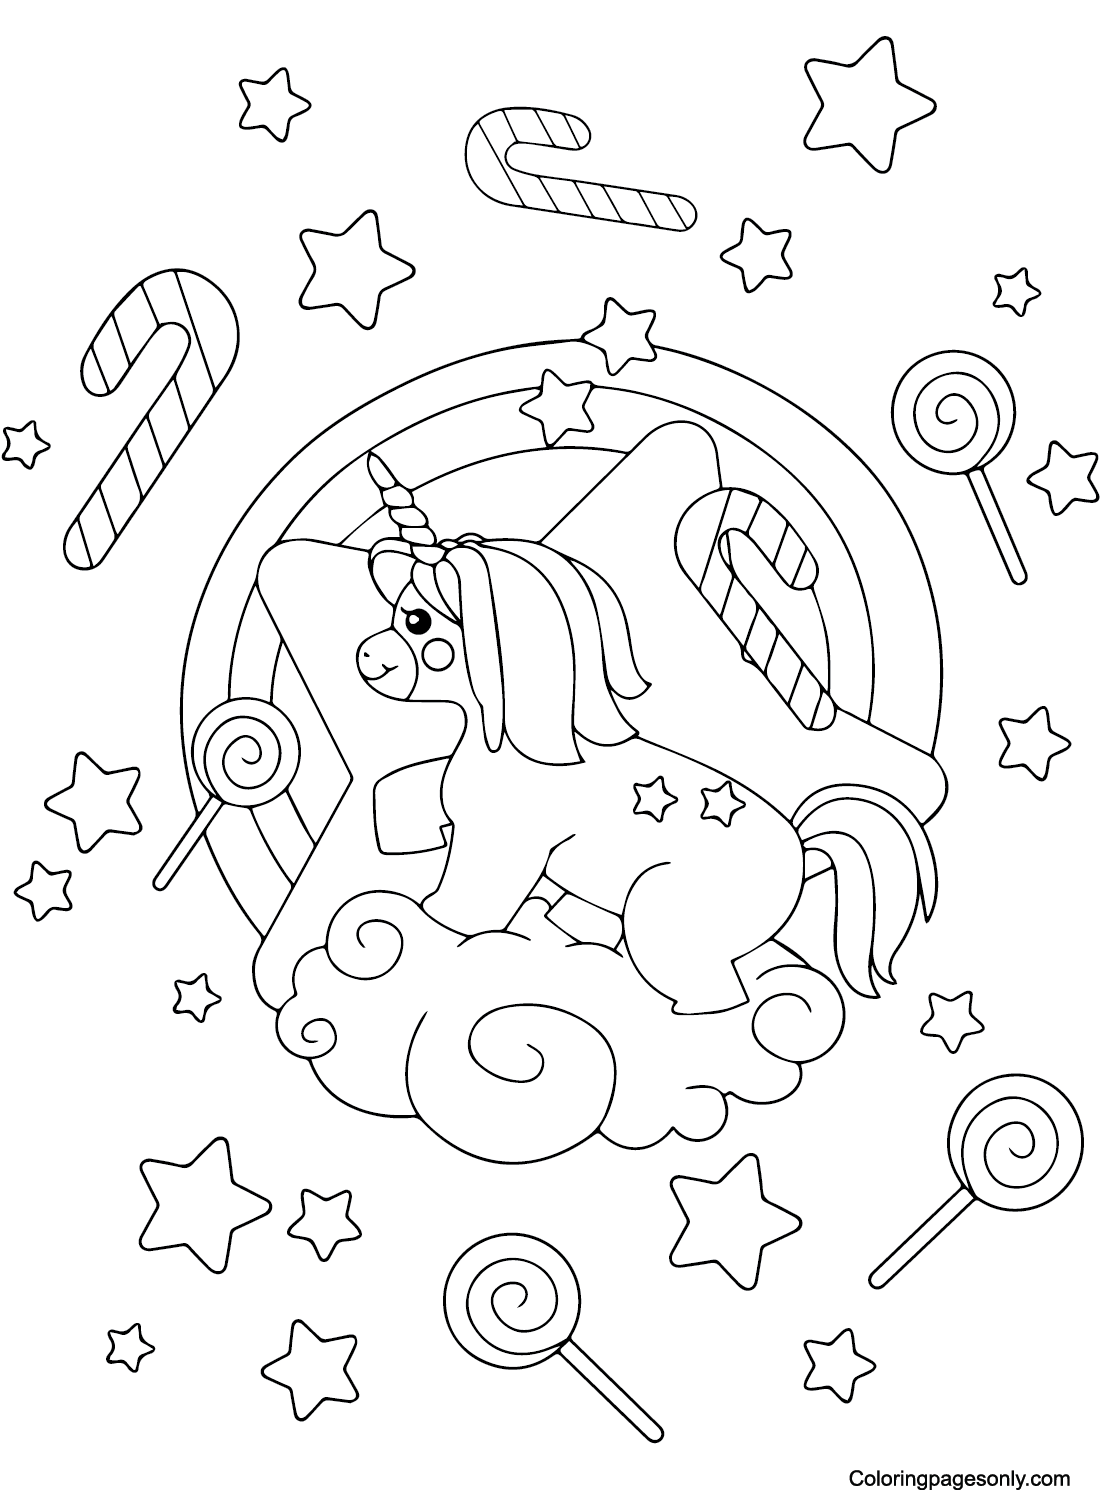 Cute Unicorn in Candyland Coloring Page